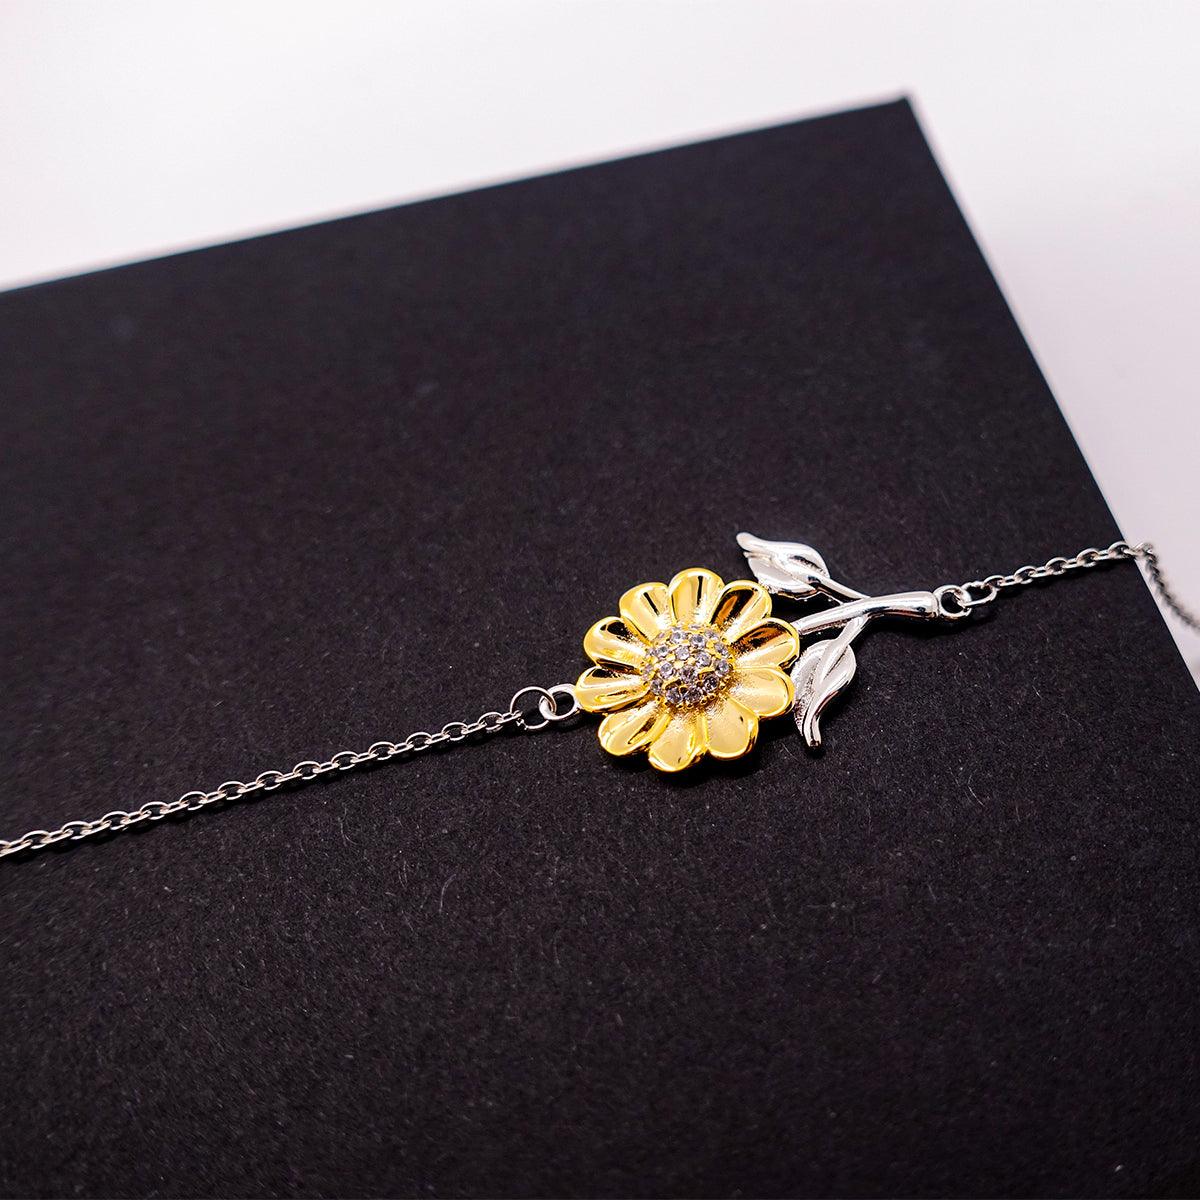 To My Little Brother Gifts, Inspirational Little Brother Sunflower Bracelet, Sentimental Birthday Christmas Unique Gifts For Little Brother Behind you, all your memories, before you, all your dreams, around you, all who love you, within you, all you need - Mallard Moon Gift Shop